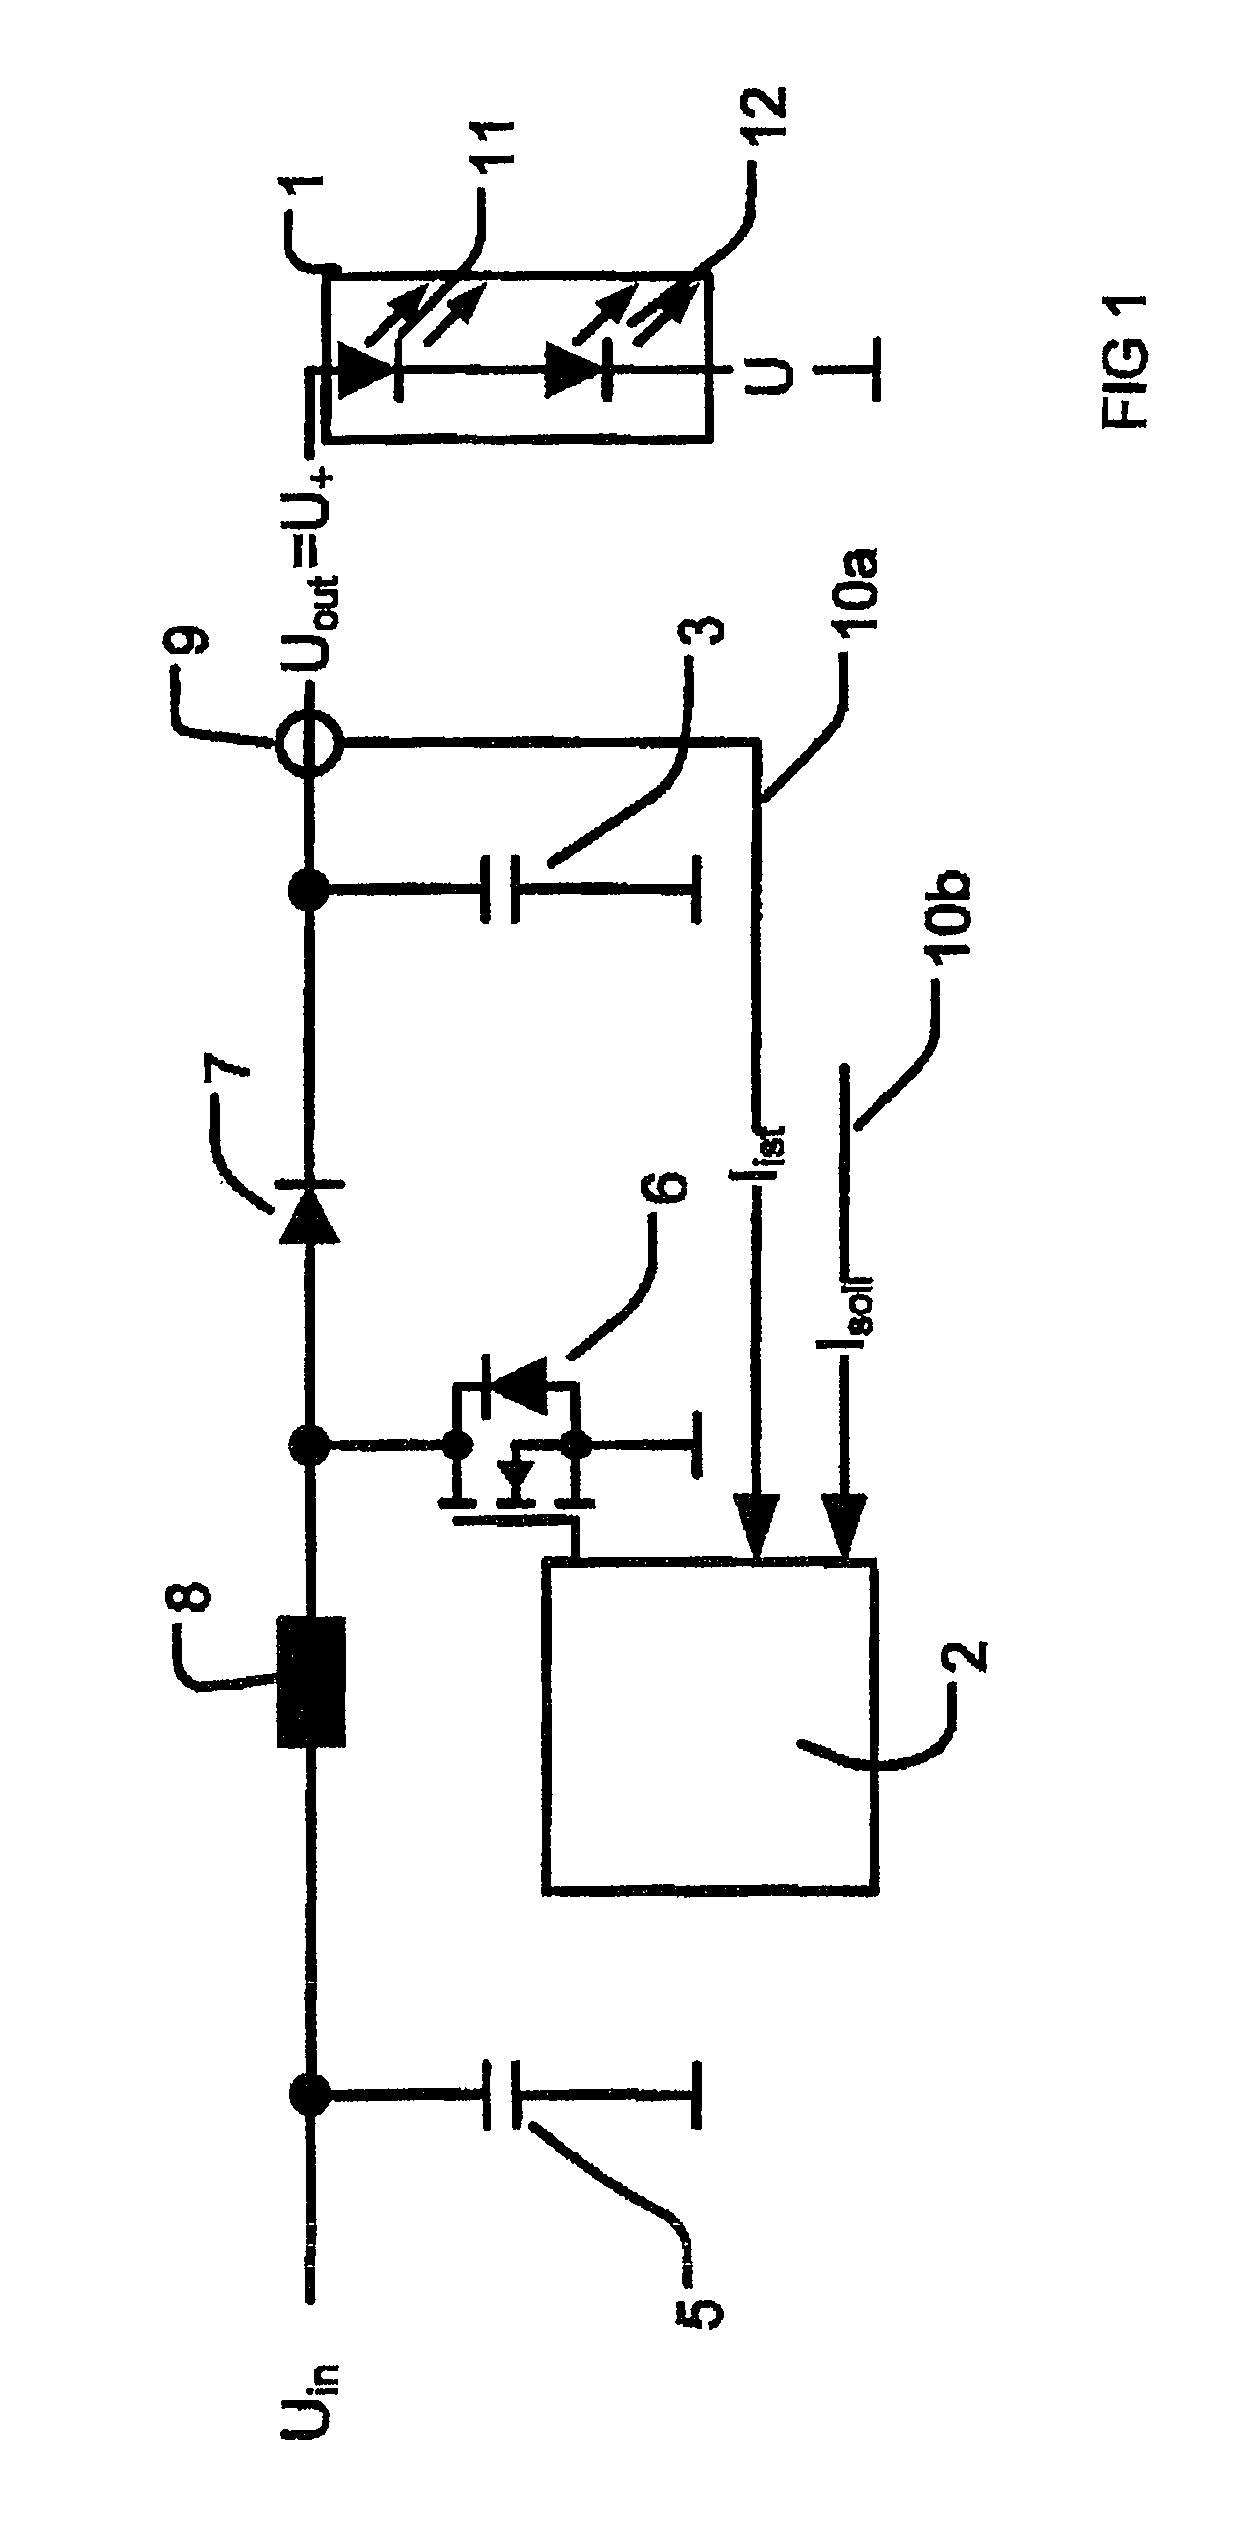 Method and circuit arrangement for controlling a load